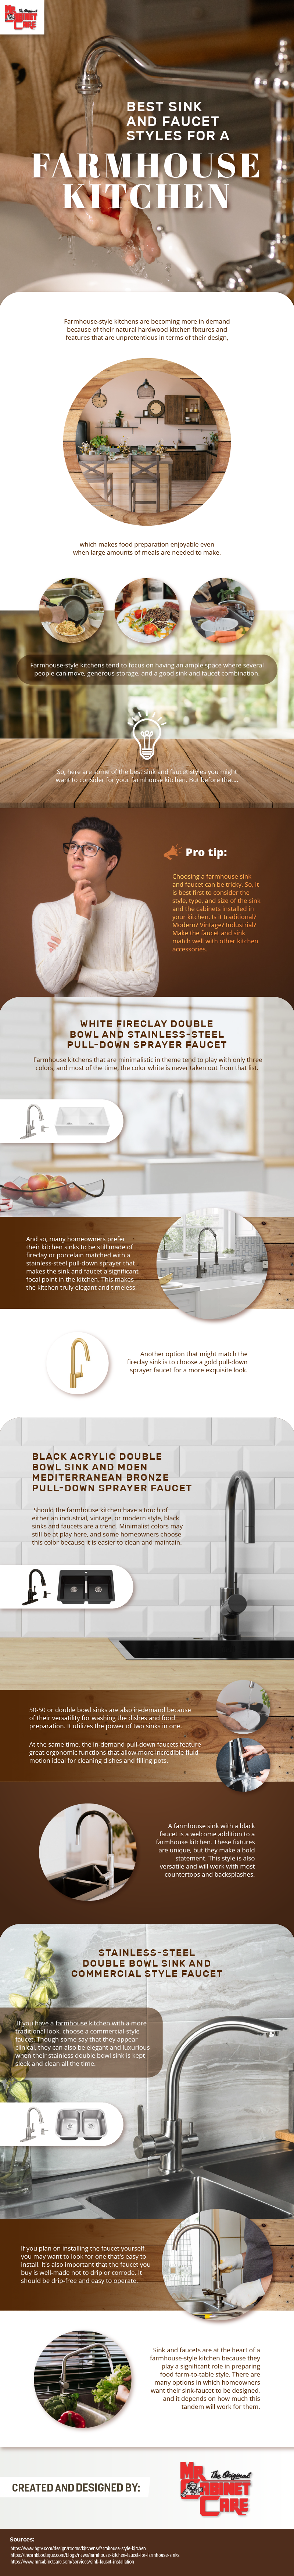 Best_Sink_and_Faucet_Styles_for_a_Farmhouse_Kitchen_infog_image